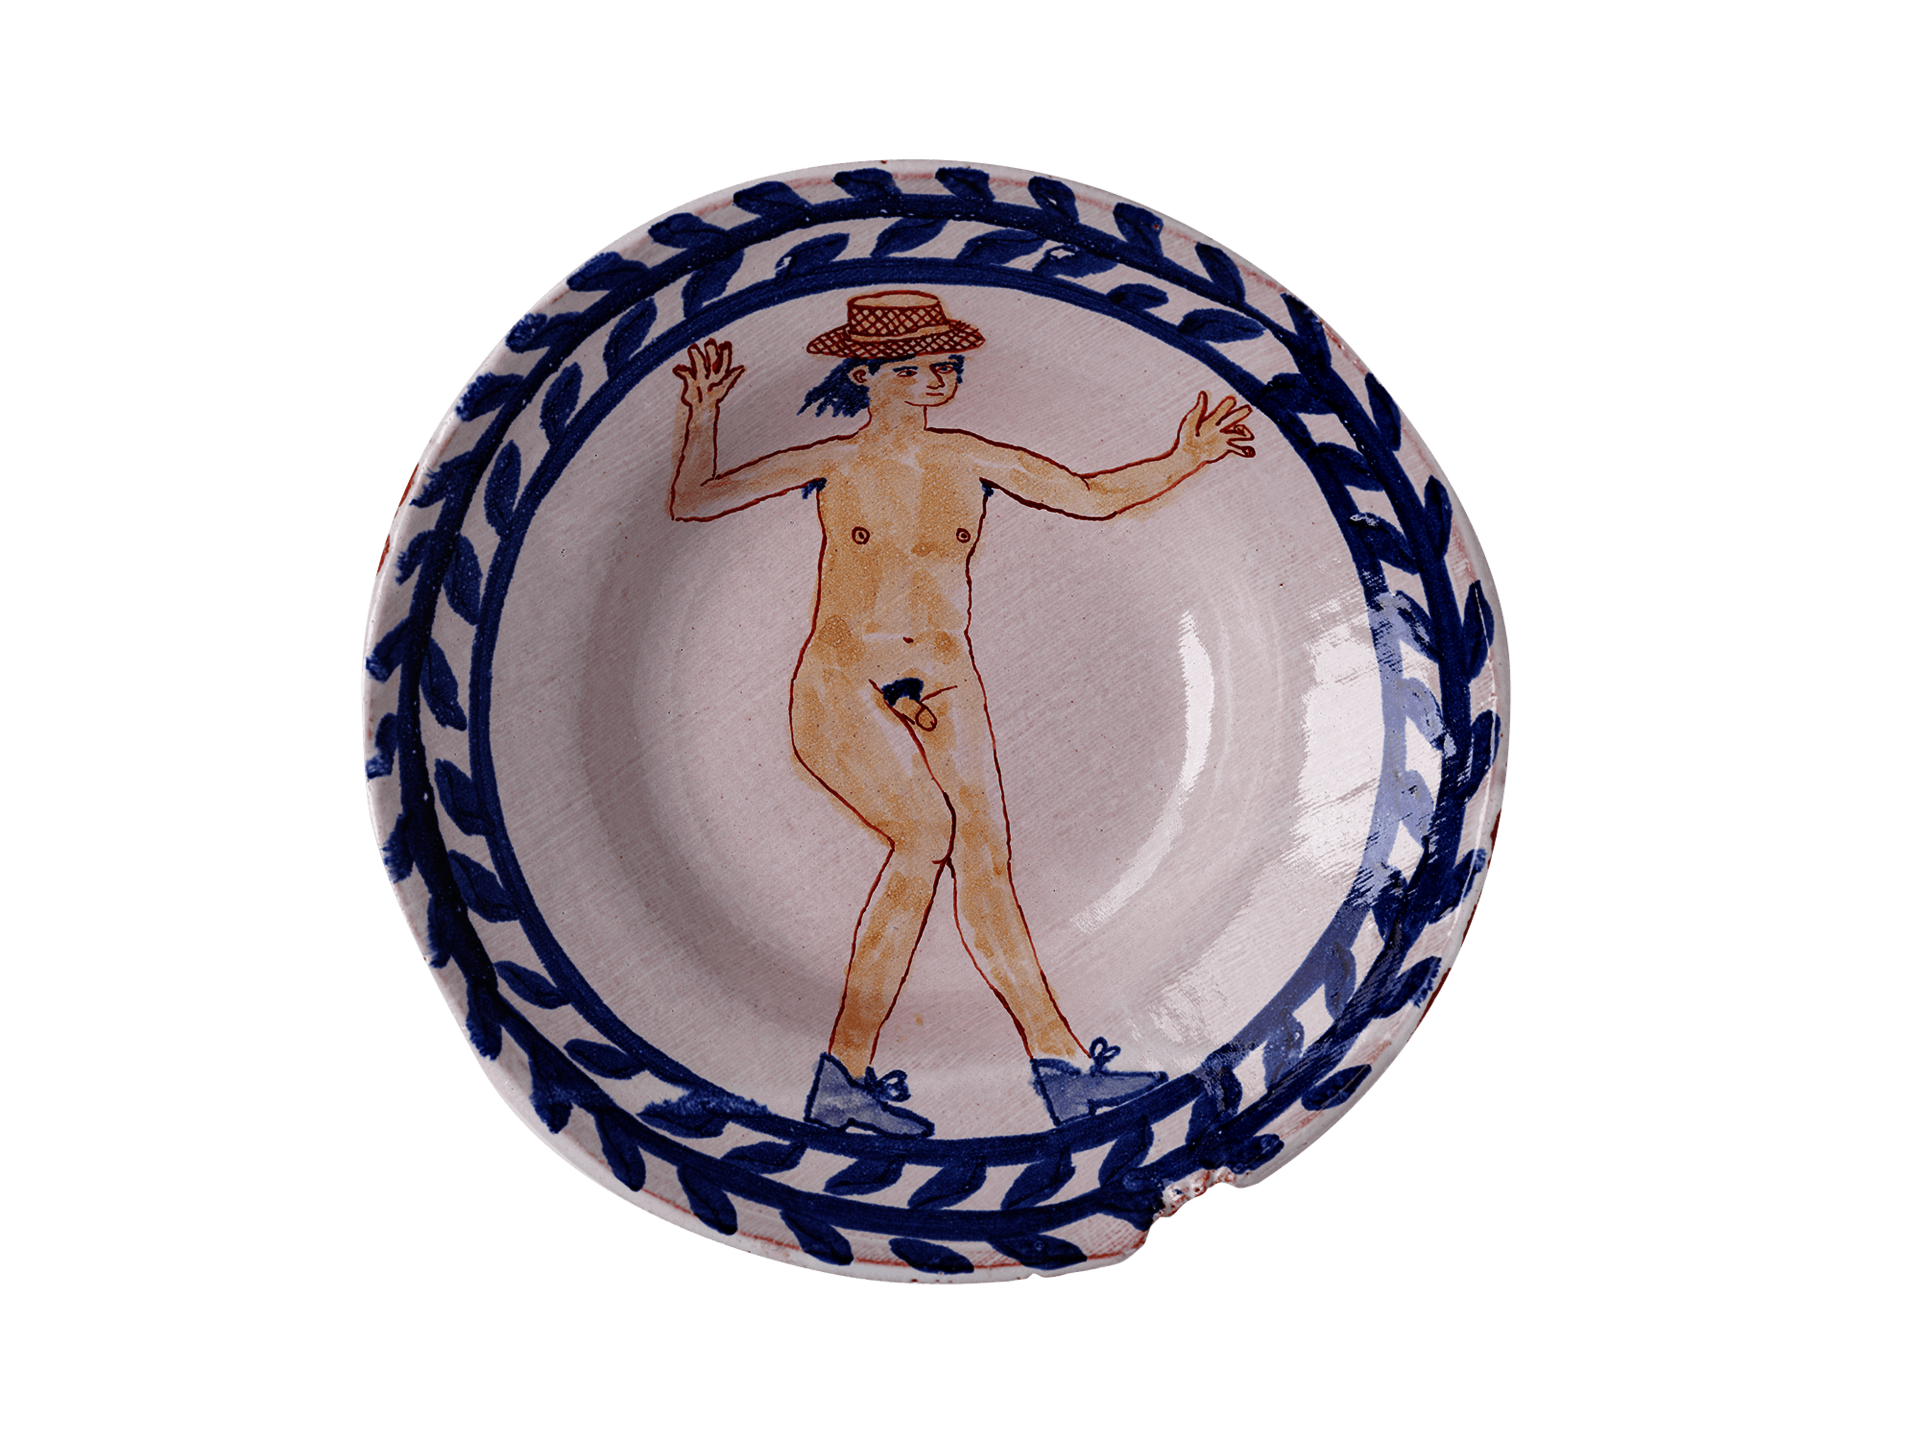 Ceramic plate with a decorative floral border and an illustration of a dancing nude man wearing a full-brimmed hat and shoes